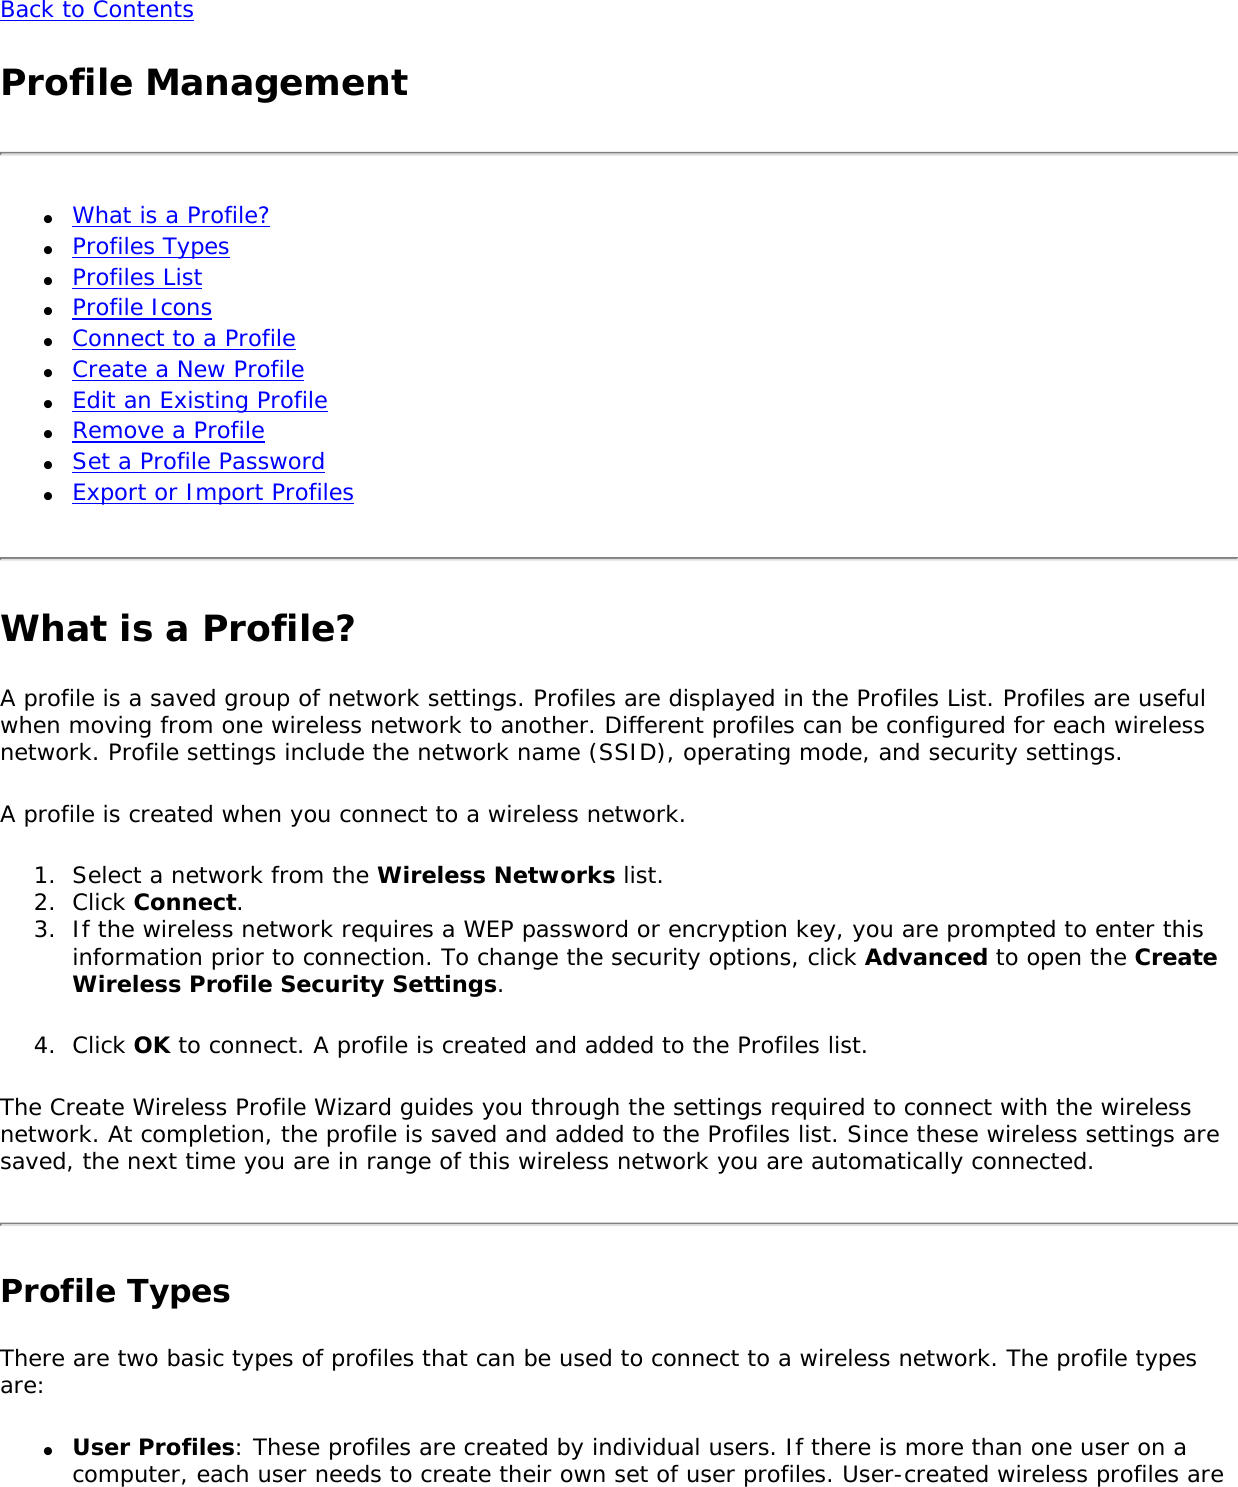 Back to ContentsProfile Management●     What is a Profile? ●     Profiles Types ●     Profiles List ●     Profile Icons ●     Connect to a Profile●     Create a New Profile●     Edit an Existing Profile●     Remove a Profile ●     Set a Profile Password ●     Export or Import ProfilesWhat is a Profile?A profile is a saved group of network settings. Profiles are displayed in the Profiles List. Profiles are useful when moving from one wireless network to another. Different profiles can be configured for each wireless network. Profile settings include the network name (SSID), operating mode, and security settings. A profile is created when you connect to a wireless network. 1.  Select a network from the Wireless Networks list.2.  Click Connect. 3.  If the wireless network requires a WEP password or encryption key, you are prompted to enter this information prior to connection. To change the security options, click Advanced to open the Create Wireless Profile Security Settings. 4.  Click OK to connect. A profile is created and added to the Profiles list.The Create Wireless Profile Wizard guides you through the settings required to connect with the wireless network. At completion, the profile is saved and added to the Profiles list. Since these wireless settings are saved, the next time you are in range of this wireless network you are automatically connected. Profile TypesThere are two basic types of profiles that can be used to connect to a wireless network. The profile types are:●     User Profiles: These profiles are created by individual users. If there is more than one user on a computer, each user needs to create their own set of user profiles. User-created wireless profiles are 